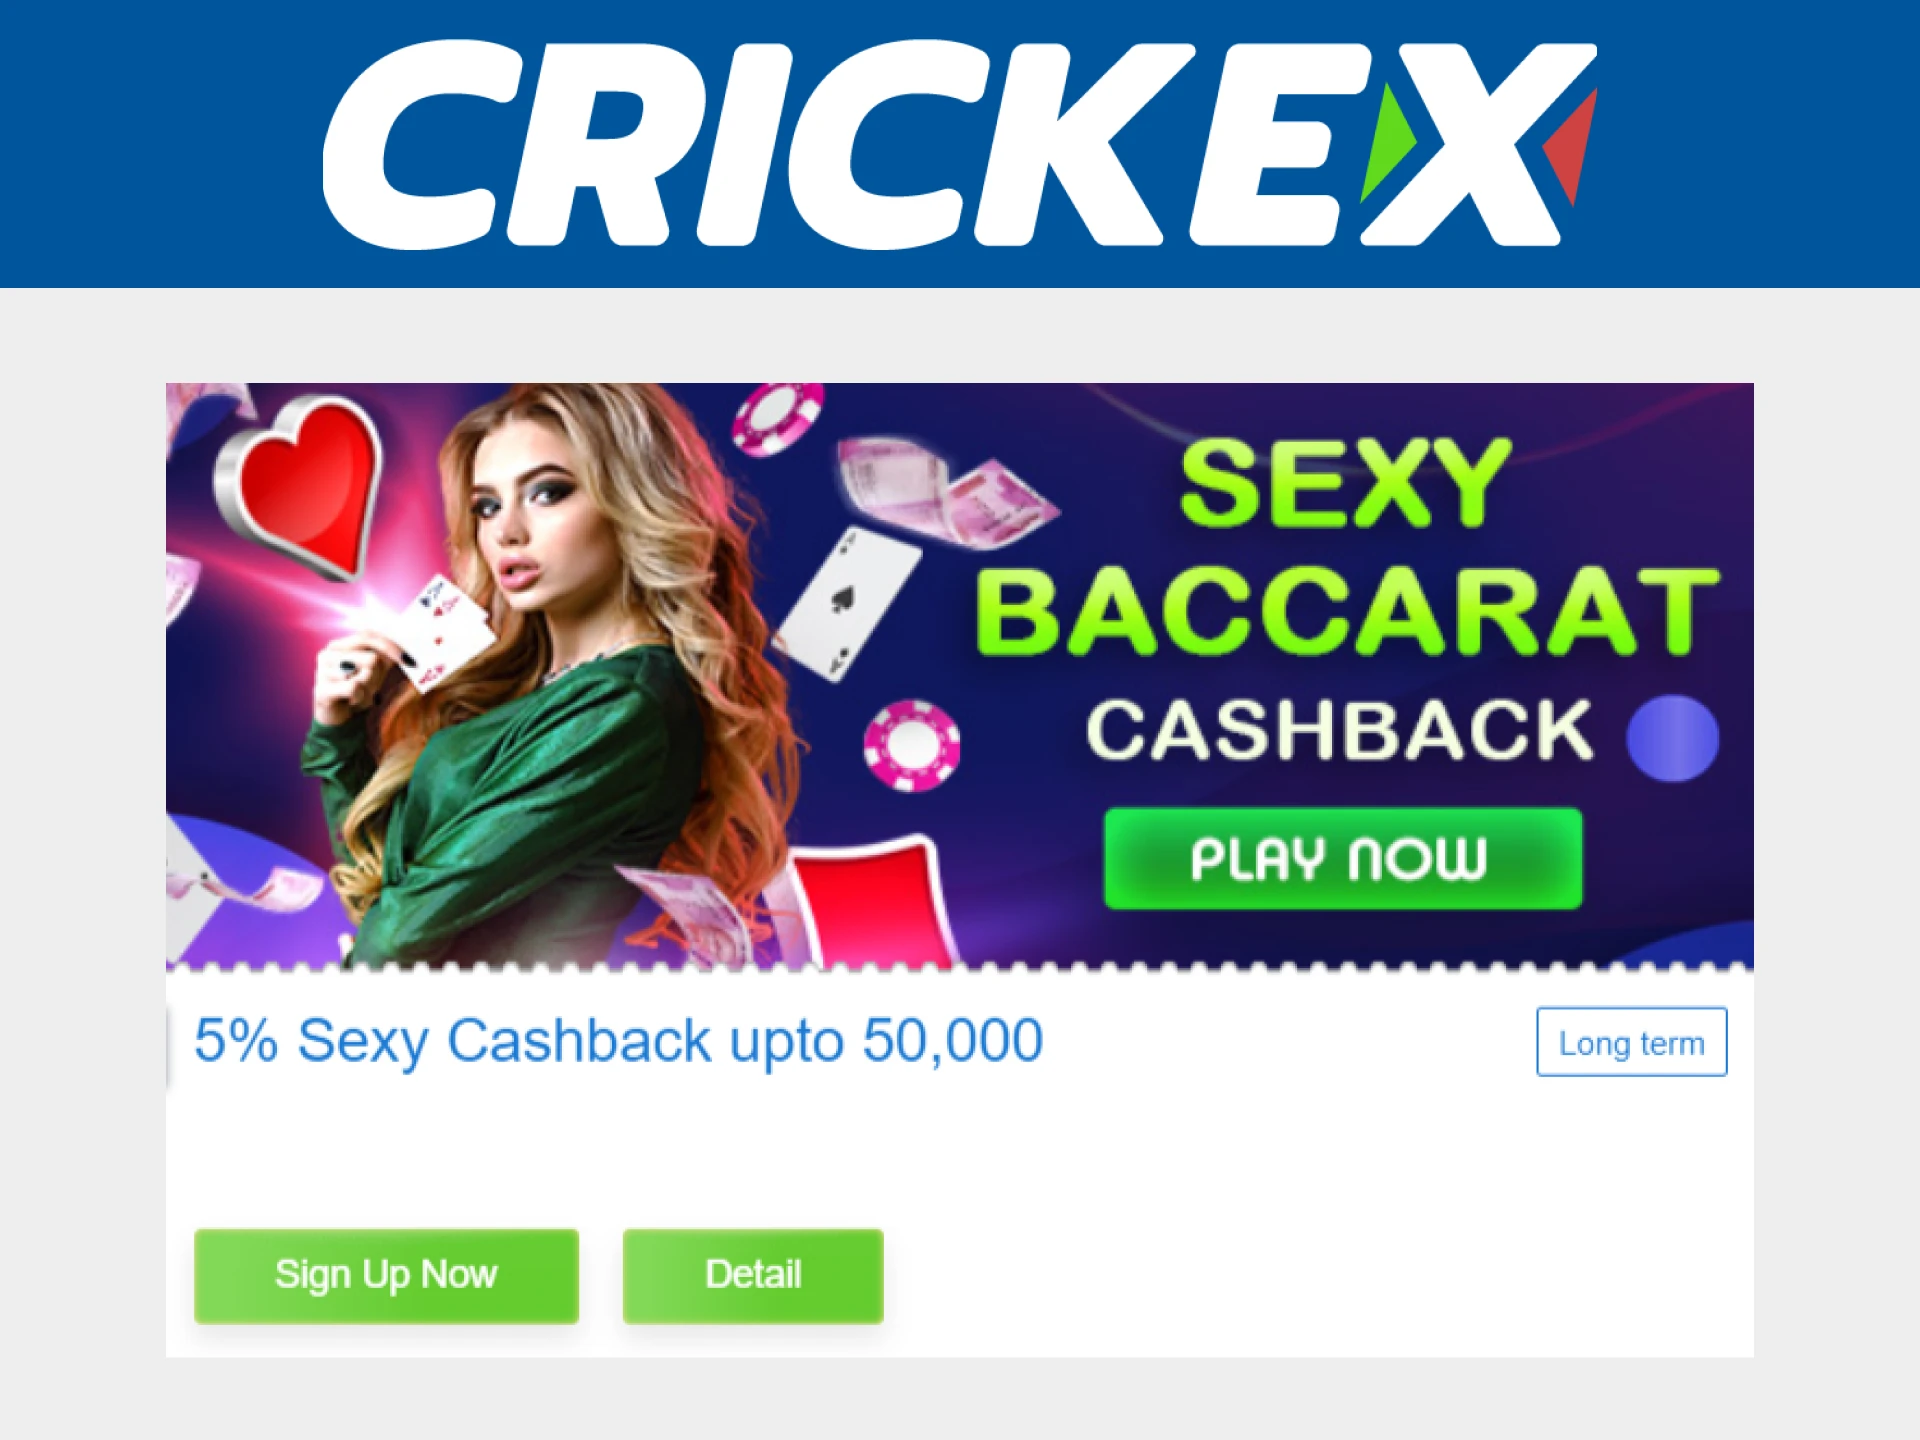 Get a bonus for Sexy Baccarat from Crickex.